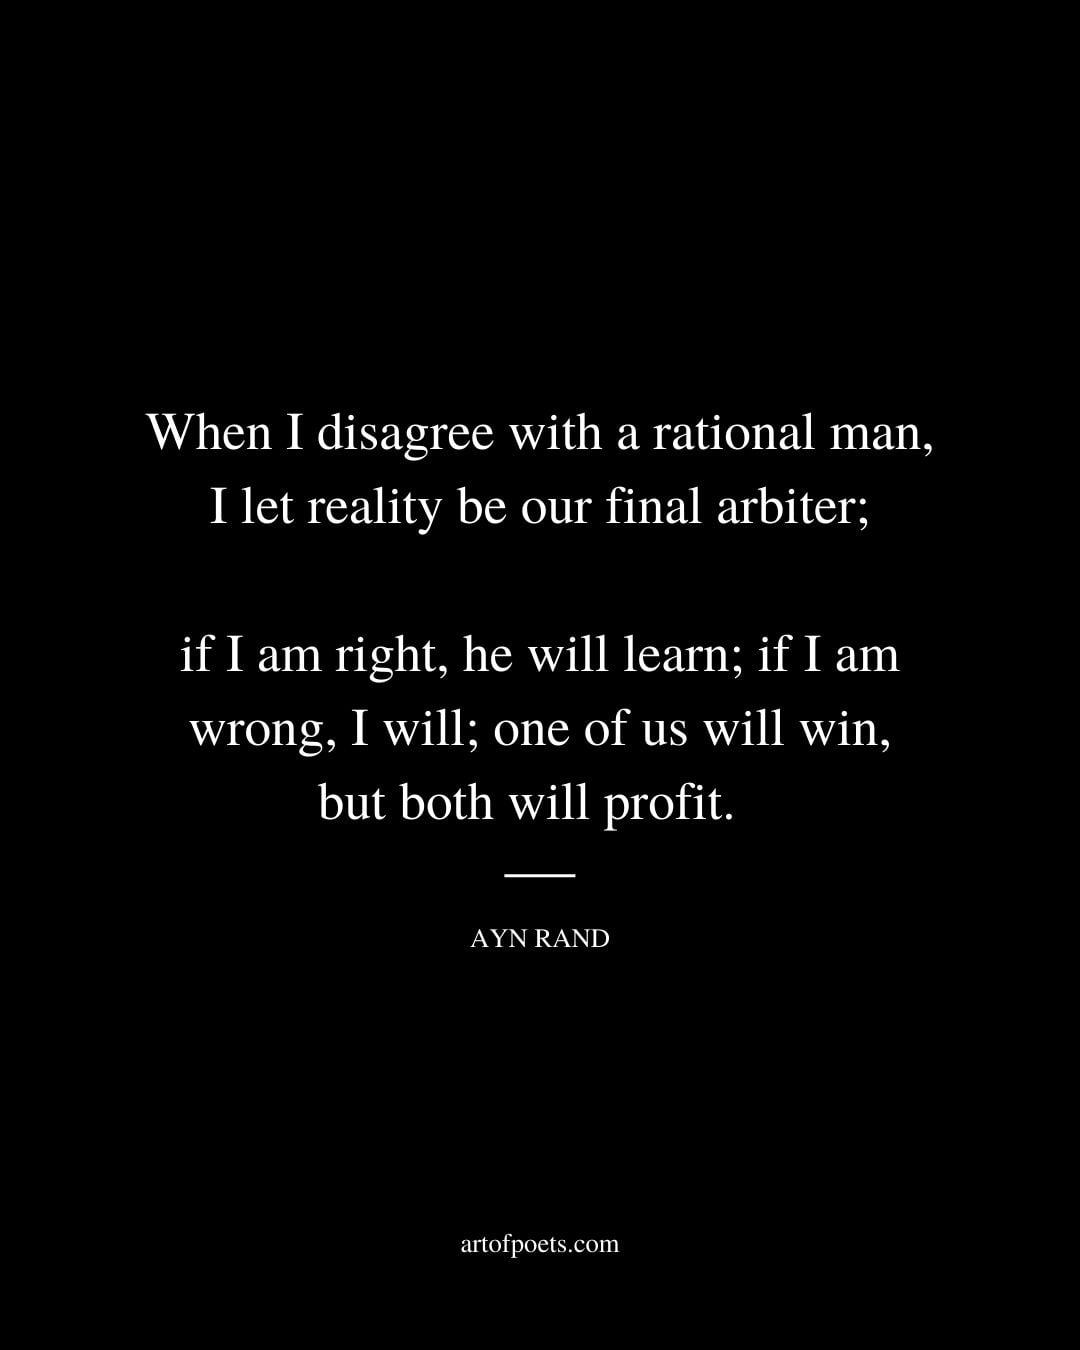 When I disagree with a rational man I let reality be our final arbiter if I am right he will learn if I am wrong